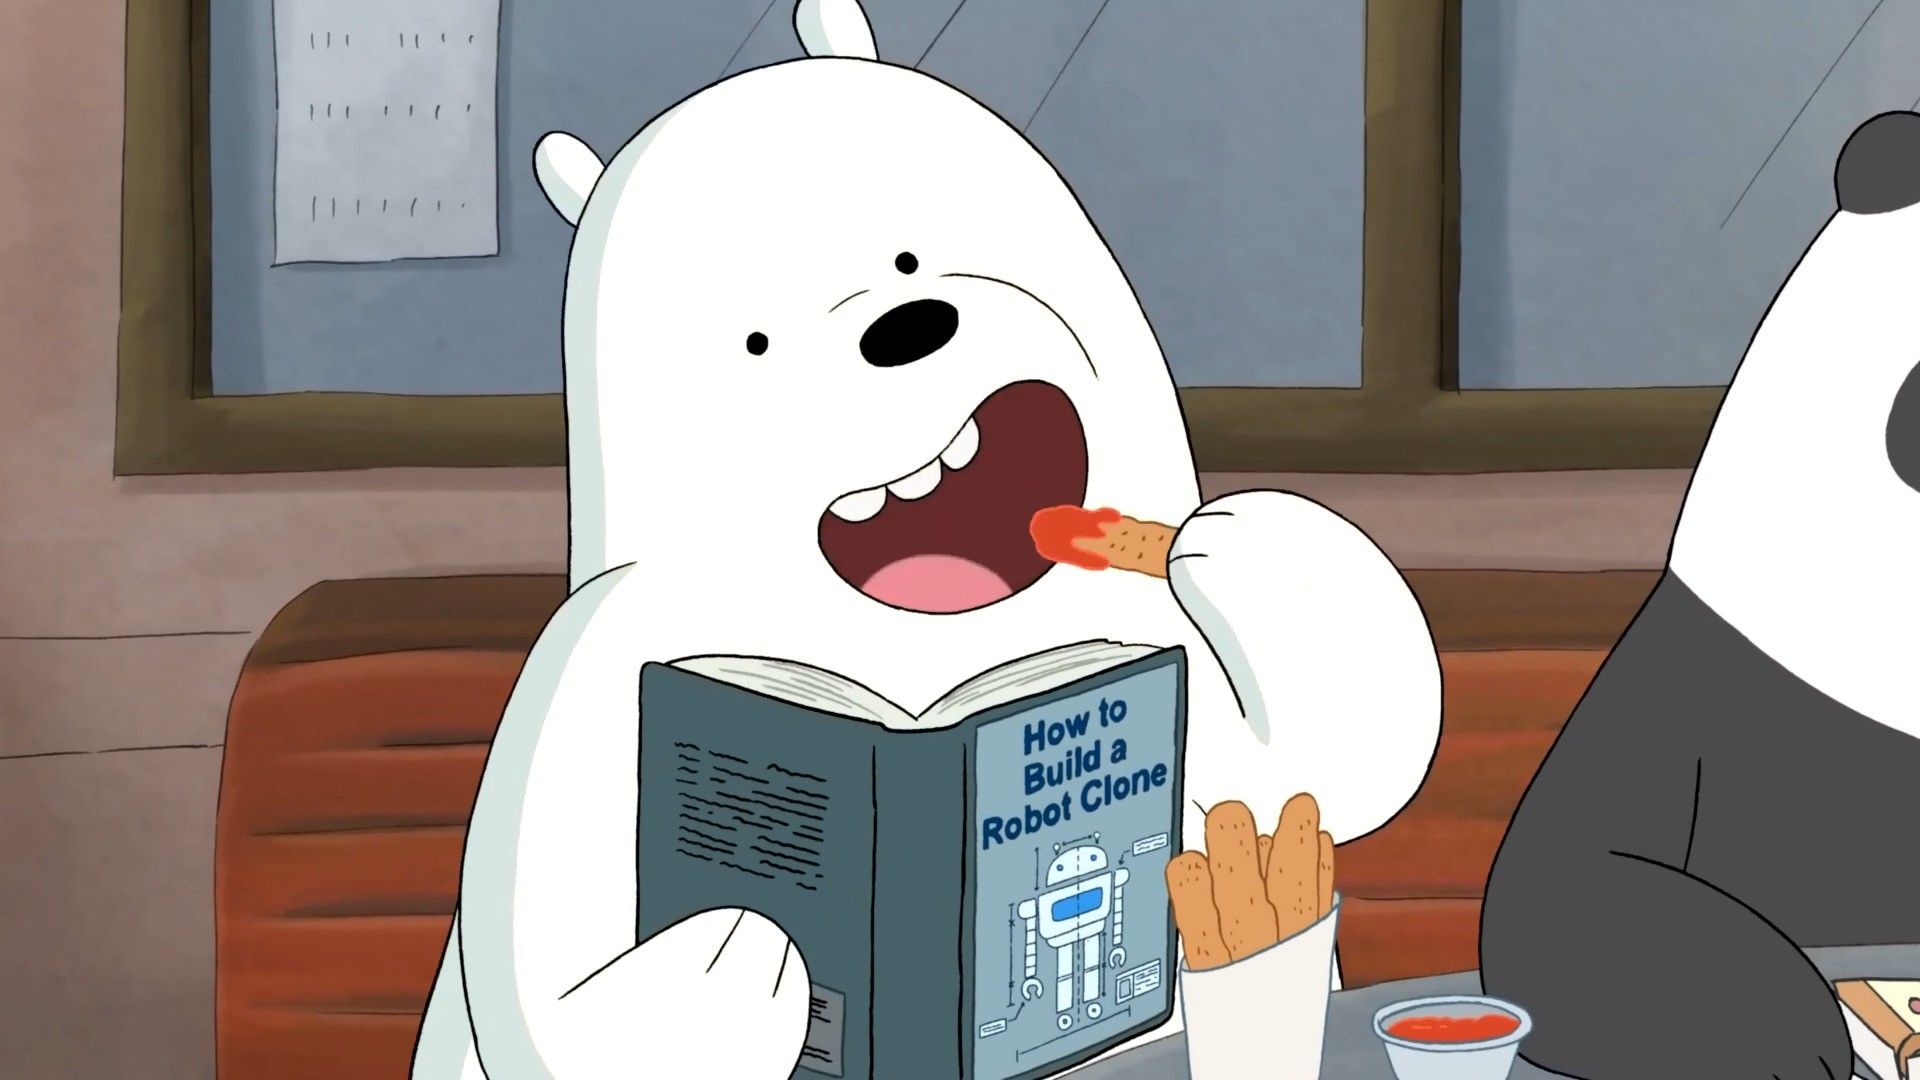 A white bear reading a book on how to build a robot clone - We Bare Bears